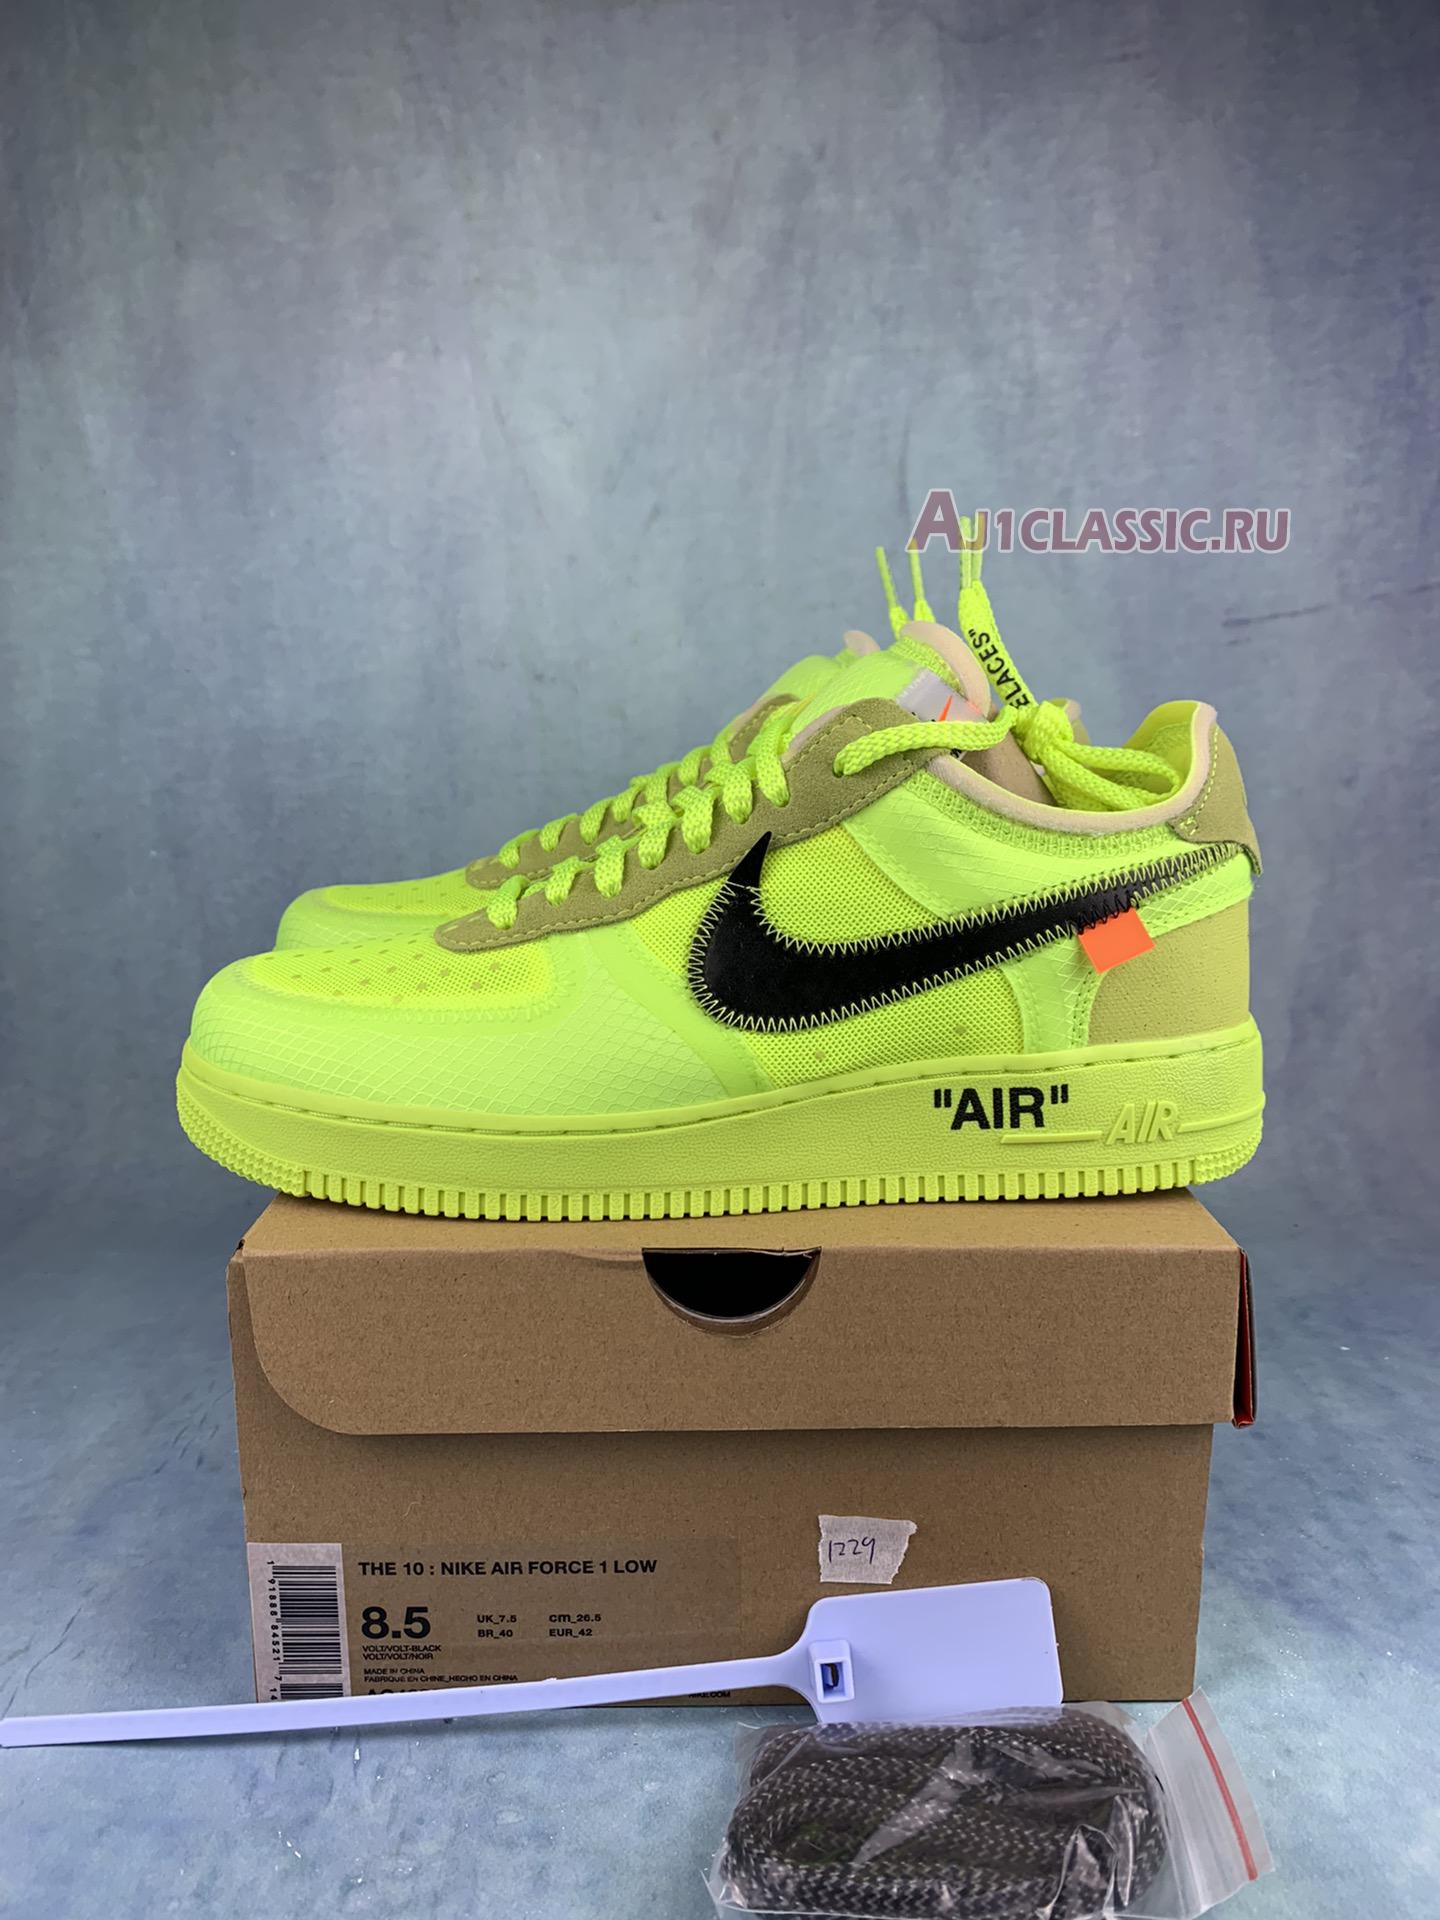 Off-White x Nike Air Force 1 Low Volt AO4606-700-2 Volt/Cone-Black-Hyper Jade Sneakers